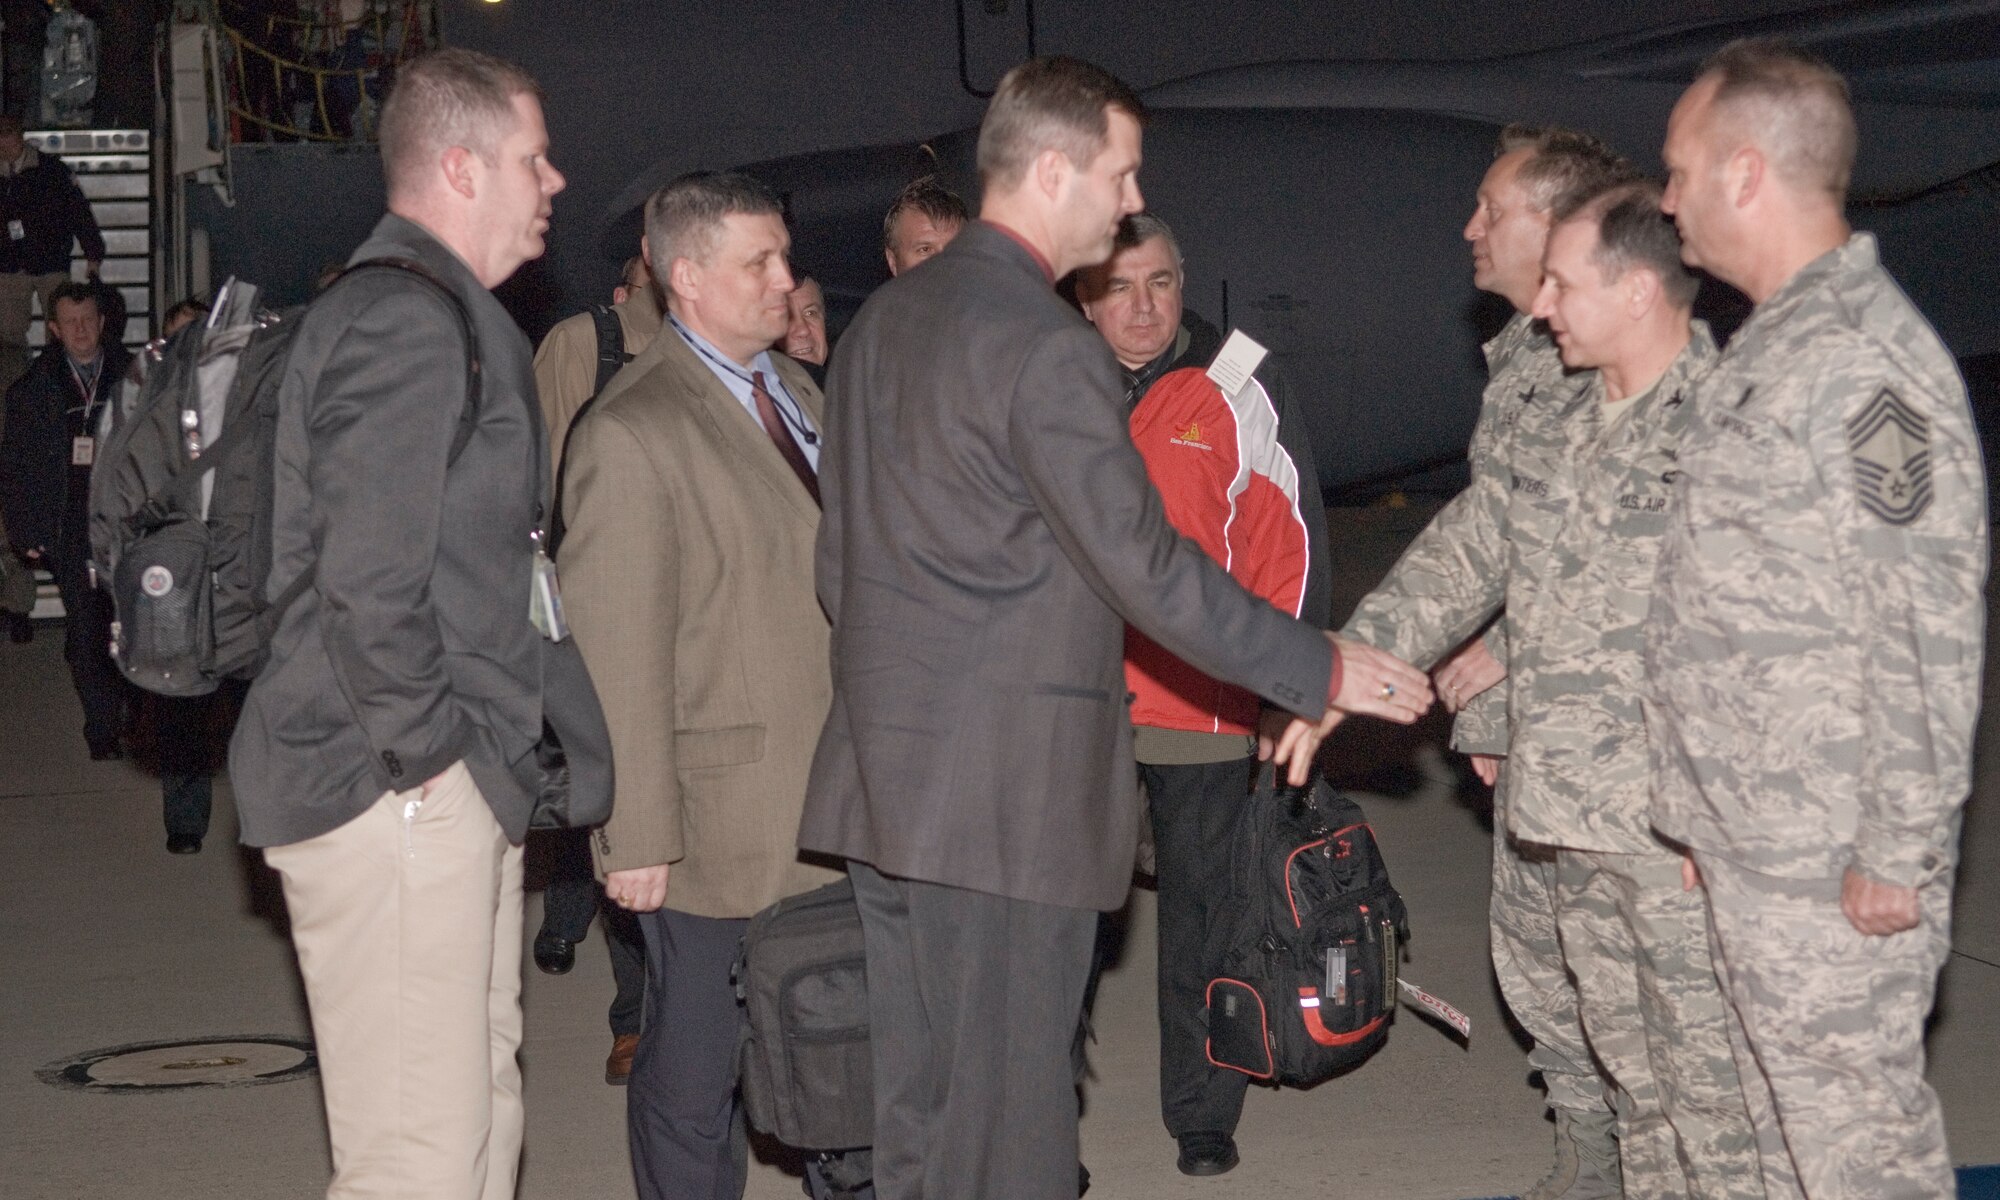 VANDENBERG AIR FORCE BASE, Calif. -- Col. David Buck, 30th Space Wing commander, and Col. Steven Winters, 30th SW vice commander, welcome members from the Strategic Arms Reduction Treaty team as they arrive at Vandenberg March 3. (U.S. Air Force photo/Christopher Hubenthal)